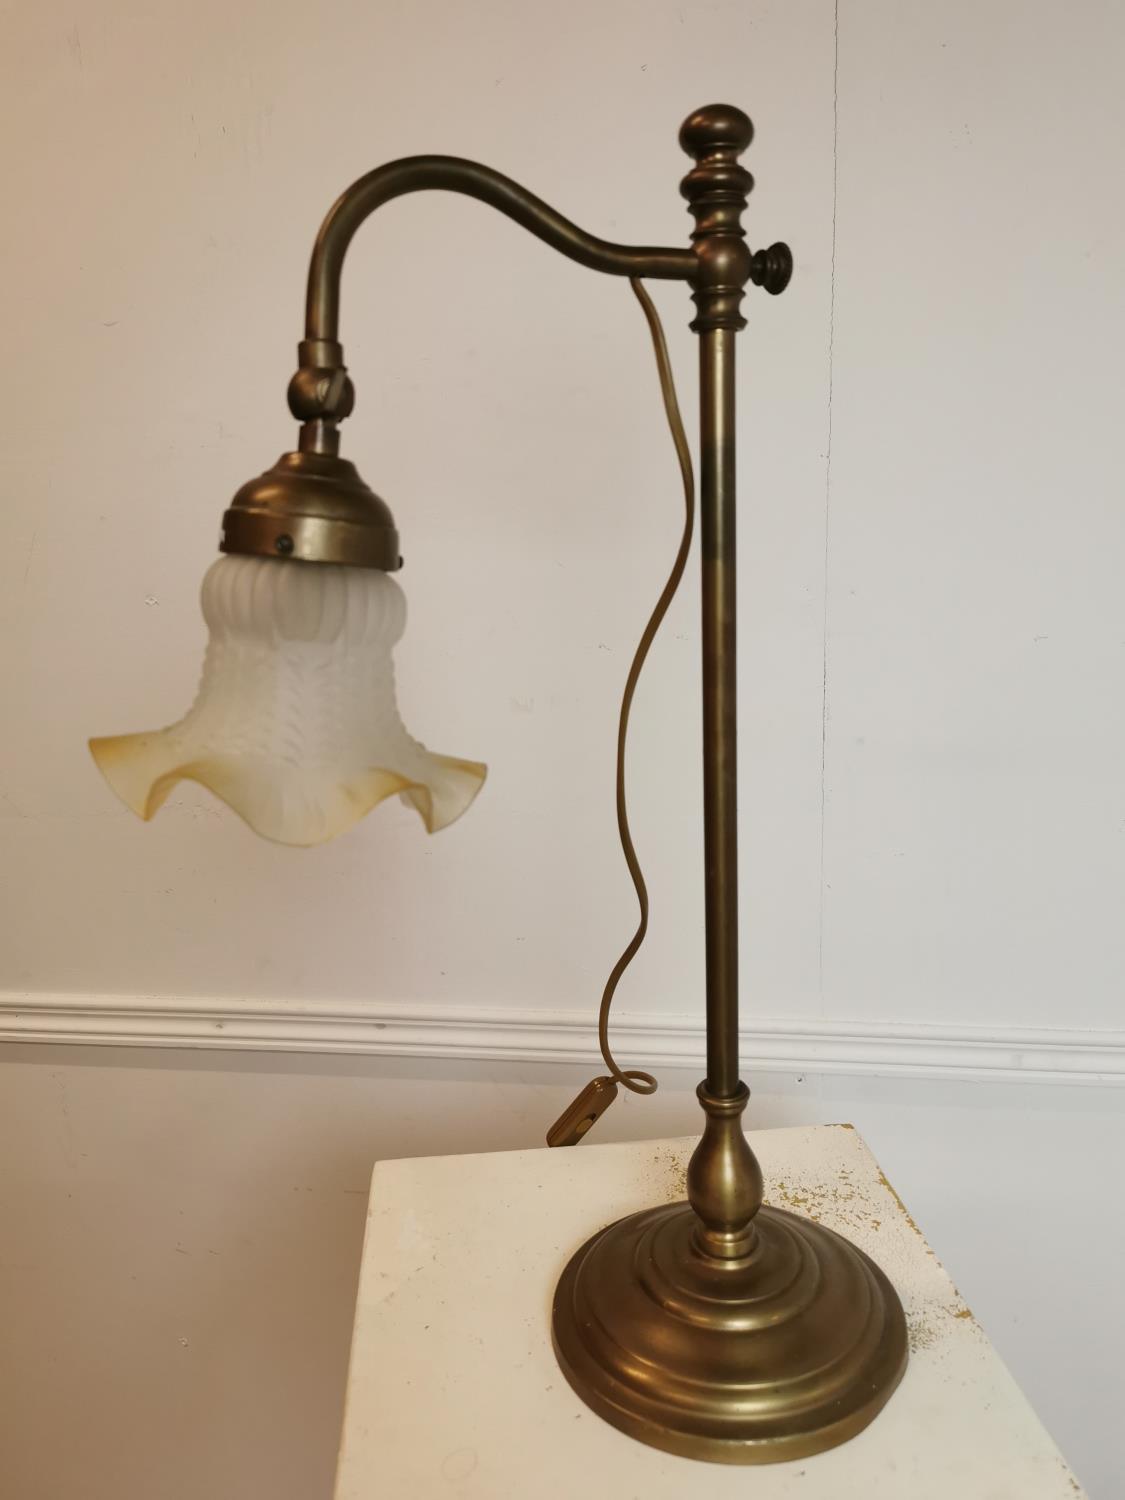 Early 20th C. brass desk lamp with frosted glass shade